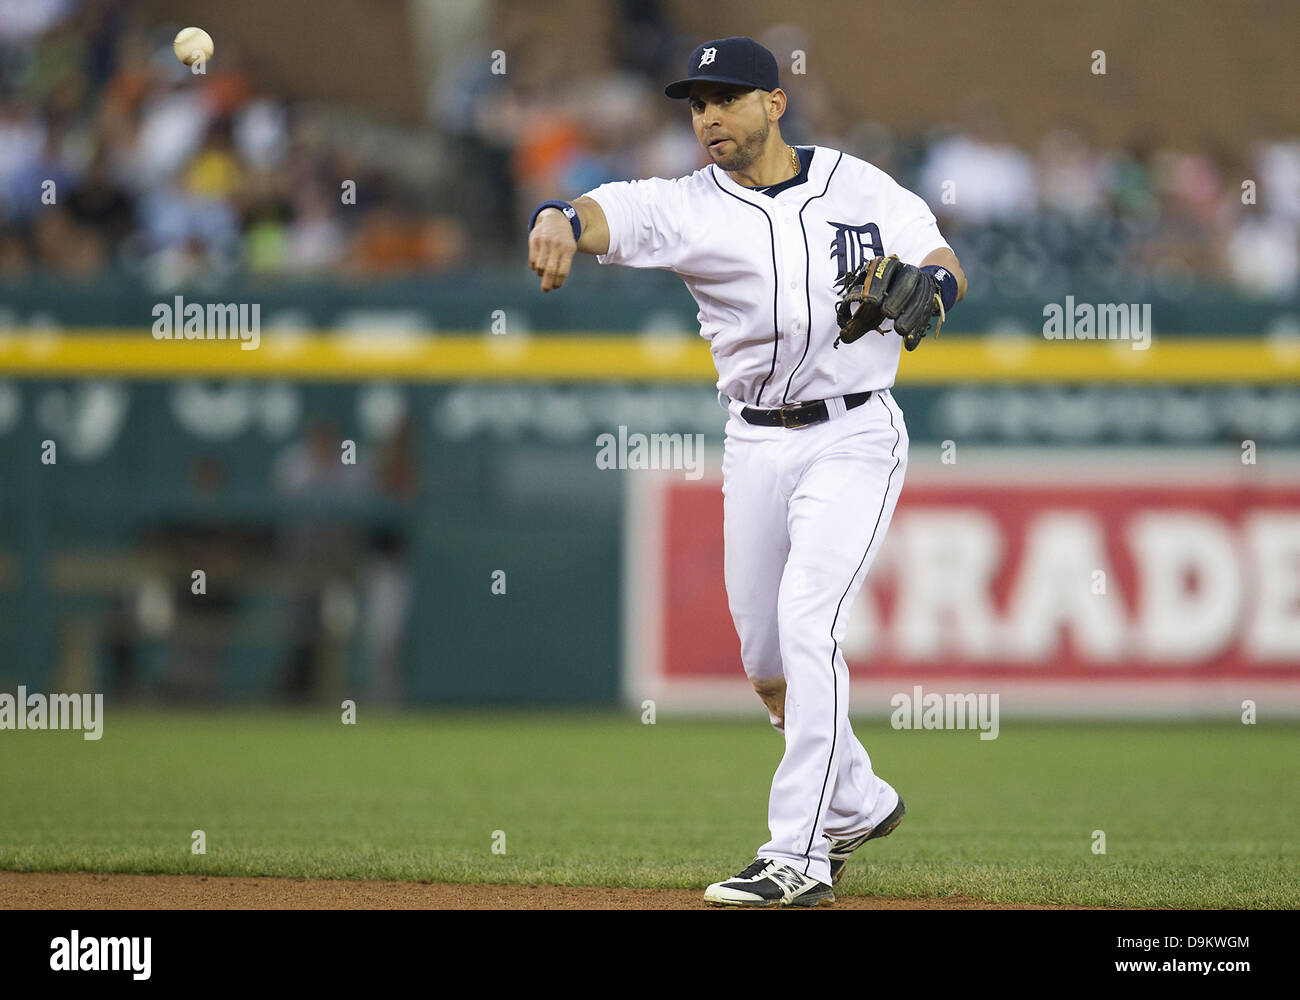 June 17, 2013 - Detroit, Michigan, United States of America - June 17, 2013: Detroit Tigers second baseman Omar Infante (4) throws the ball to first base during MLB game action between the Baltimore Orioles and the Detroit Tigers at Comerica Park in Detroit, Michigan. The Tigers defeated the Orioles 5-1. Stock Photo